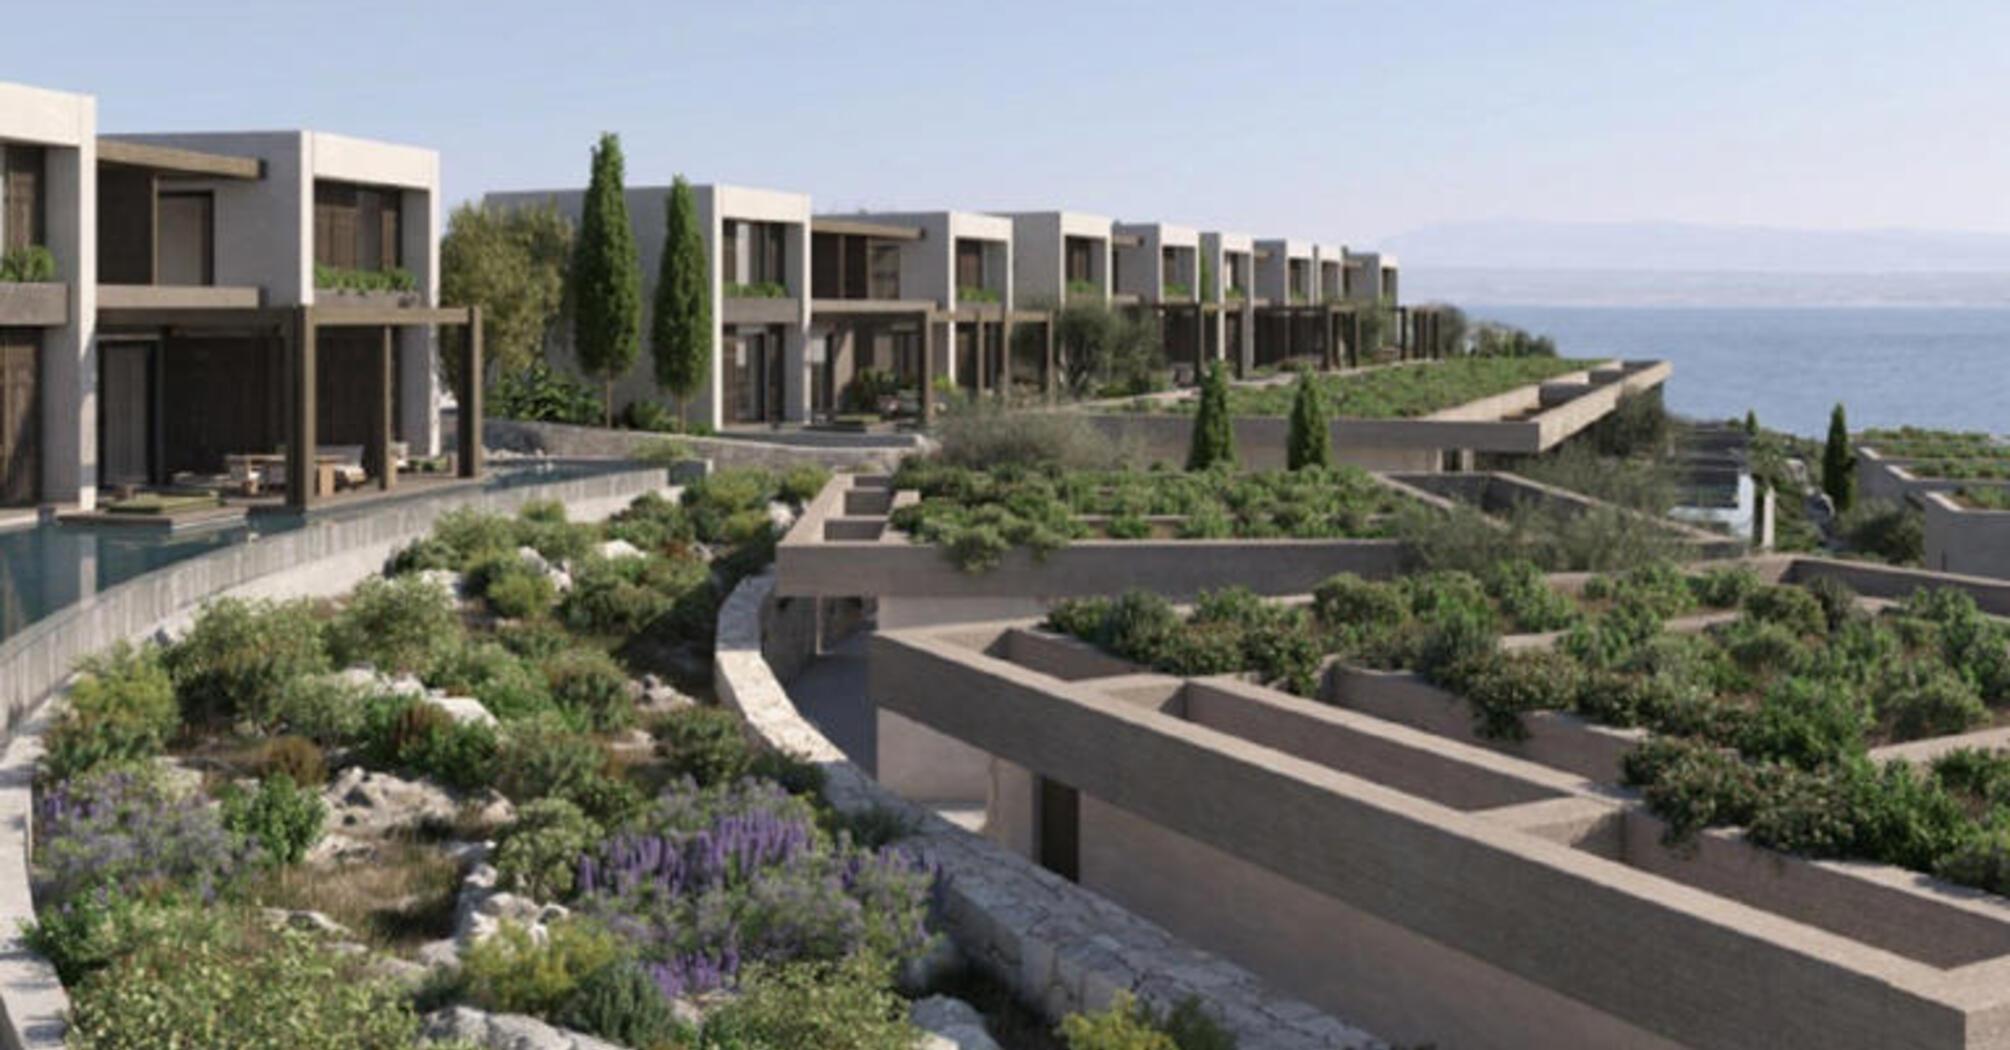 Visualization of the appearance of the JW Marriott Crete Resort & Spa